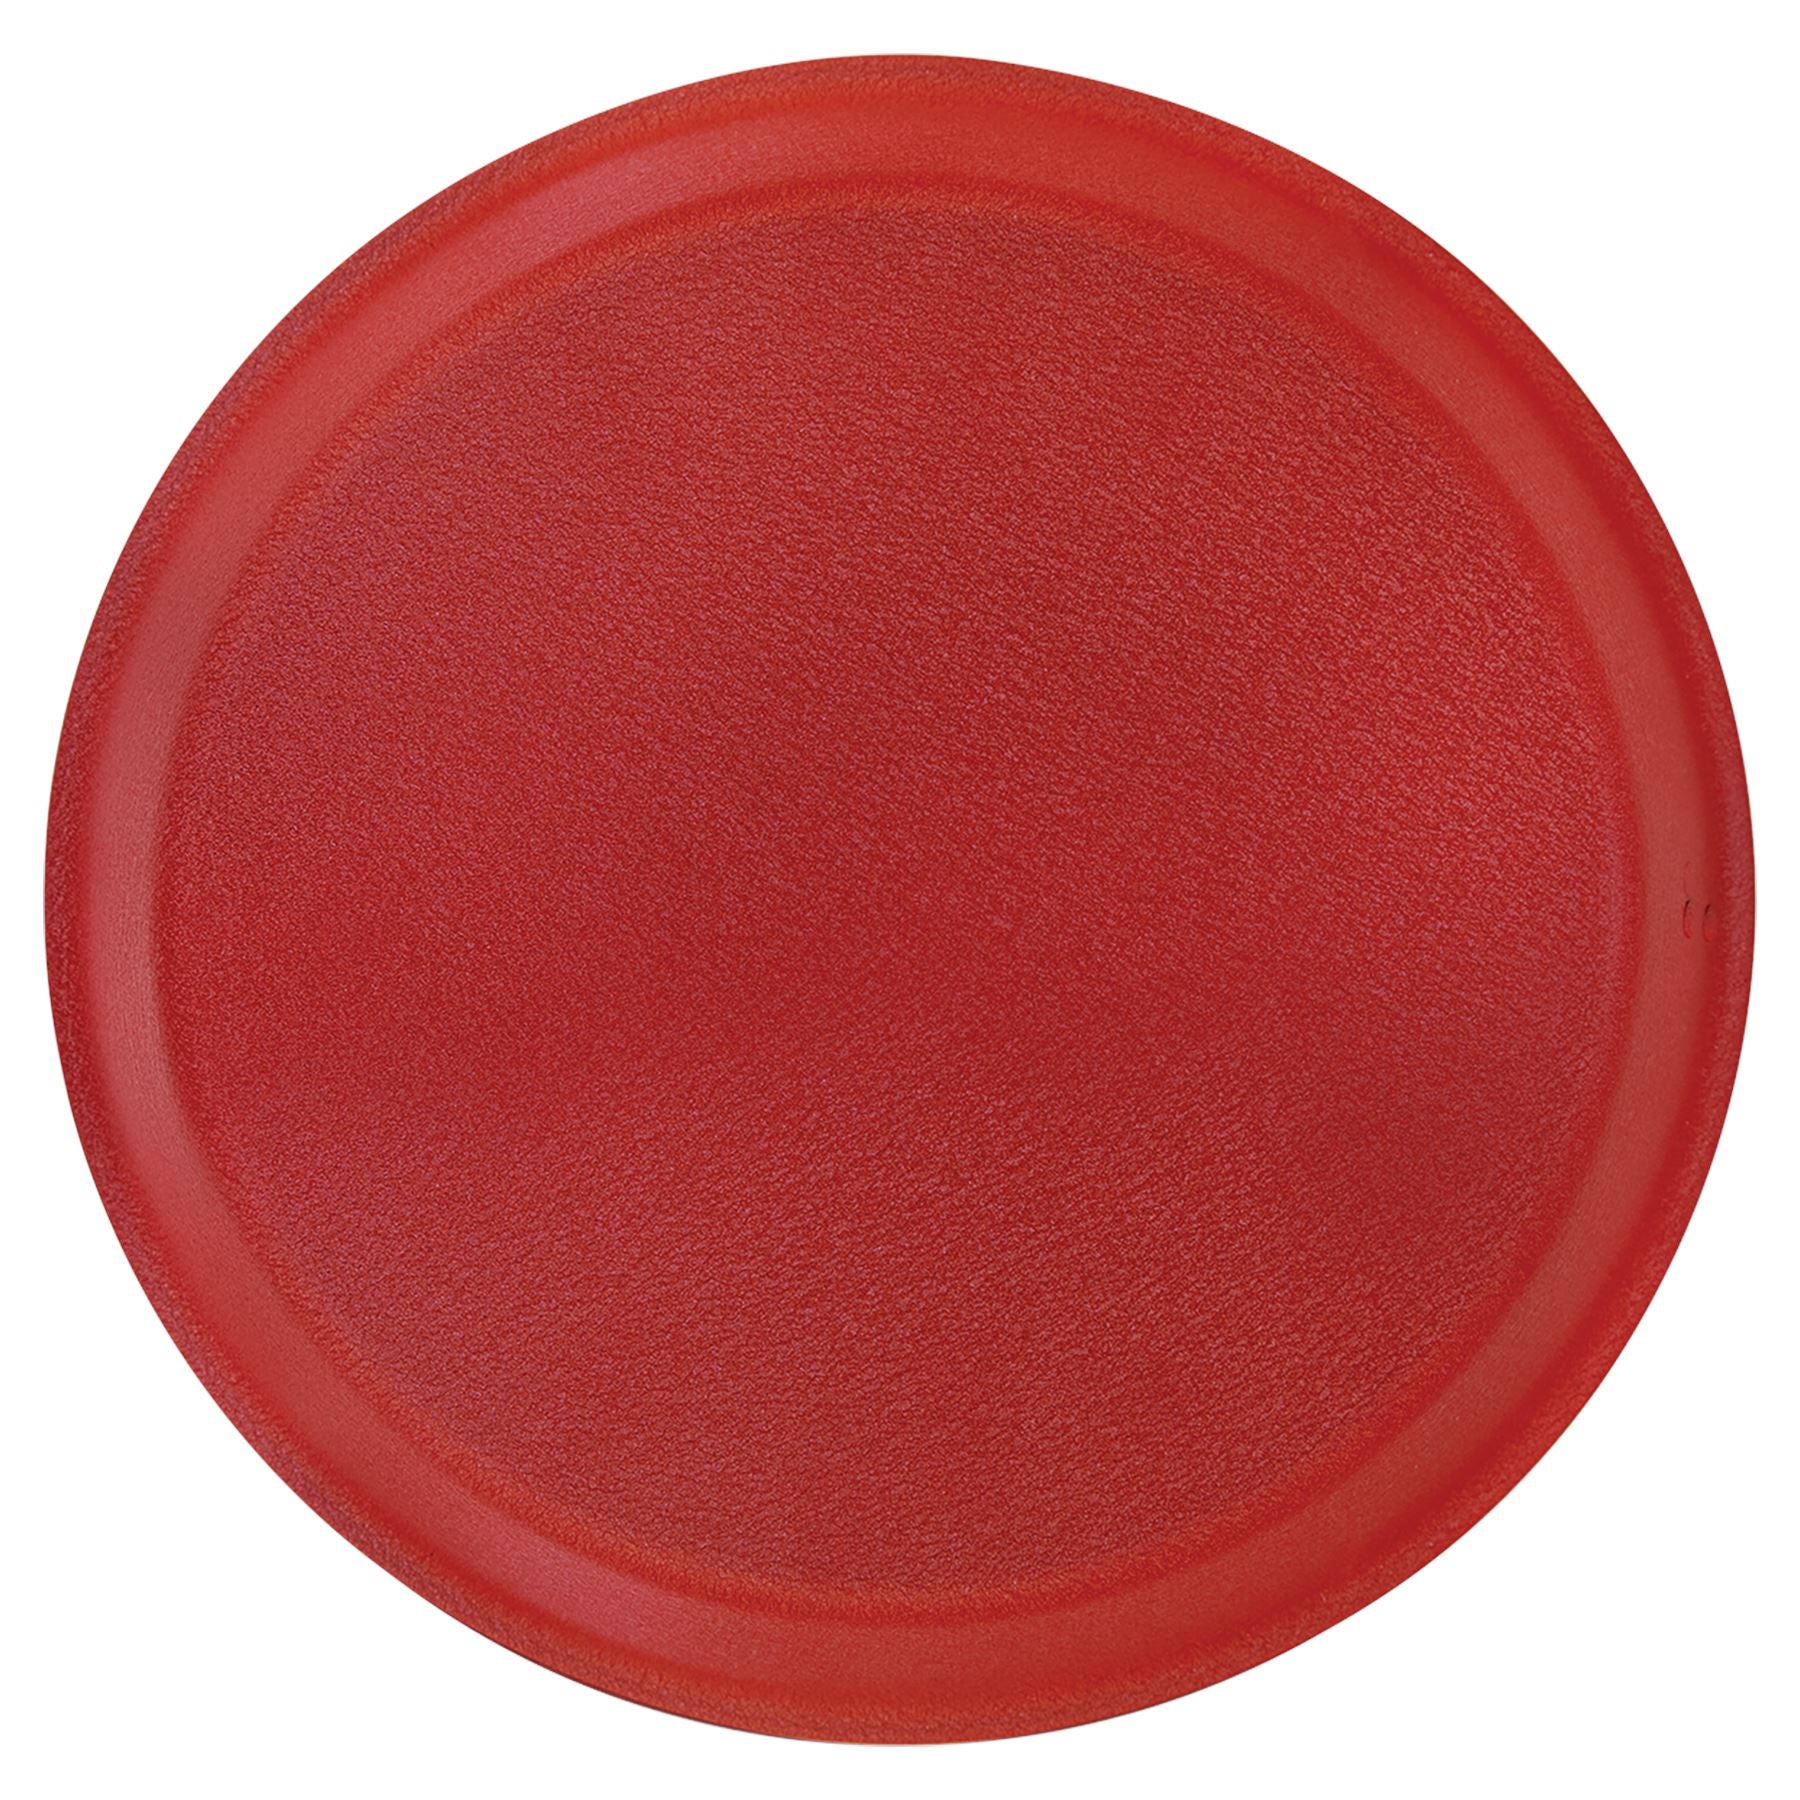 9" Aluminum Pie Pan w/Lid, Laser Engraved Cake Pan Craftworks NW Replacement Lid Only Red Small